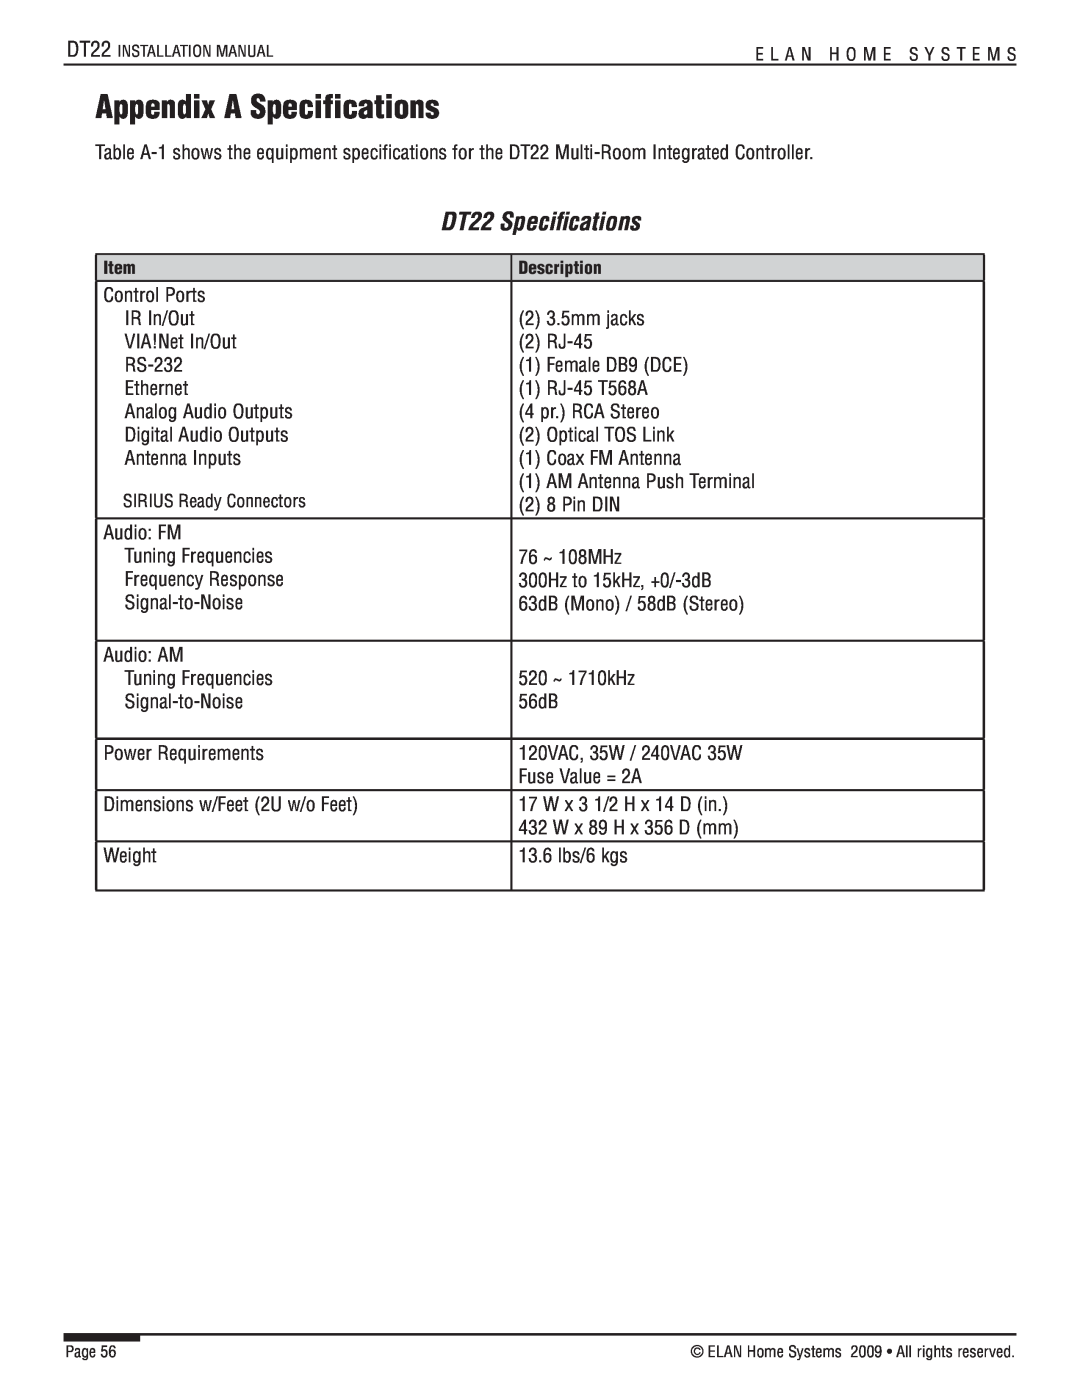 ELAN Home Systems manual Appendix A Specifications, DT22 Specifications 